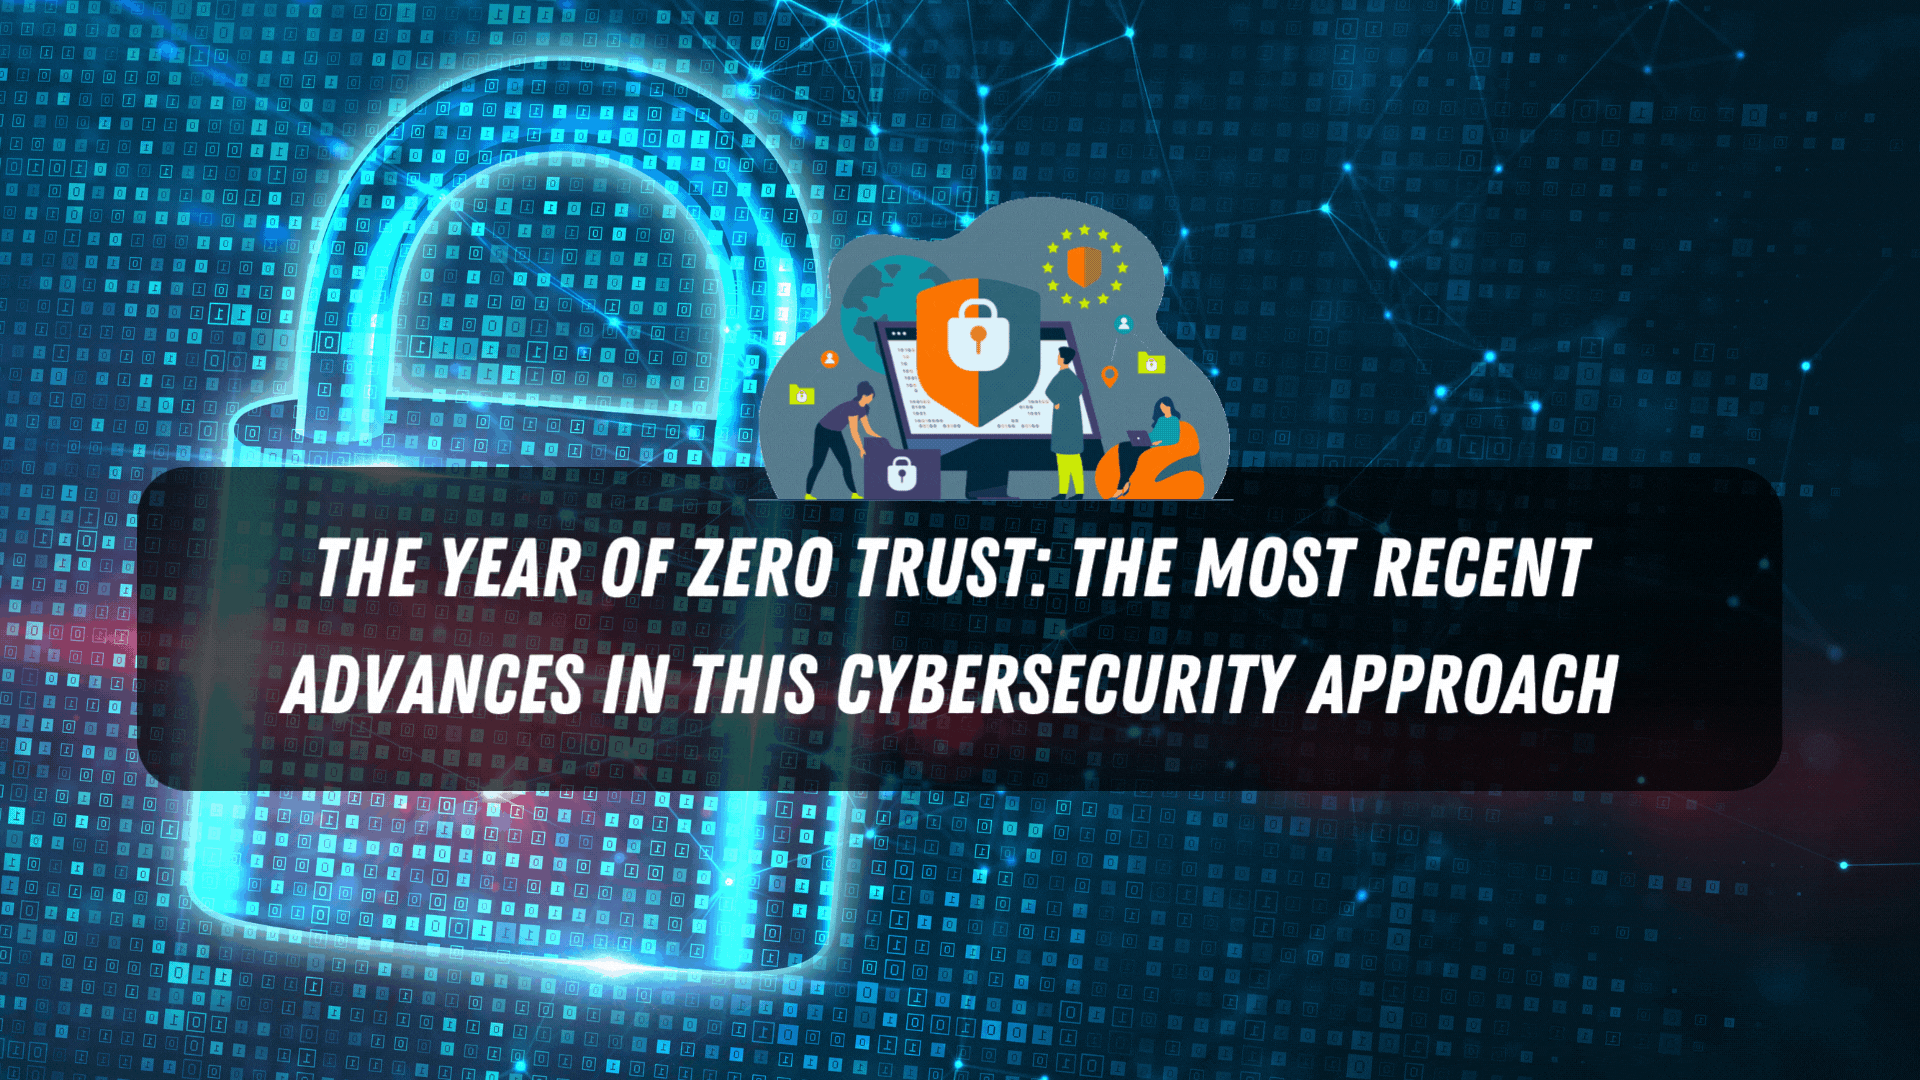 The Year of Zero Trust The Most Recent Advances in This Cybersecurity Approach